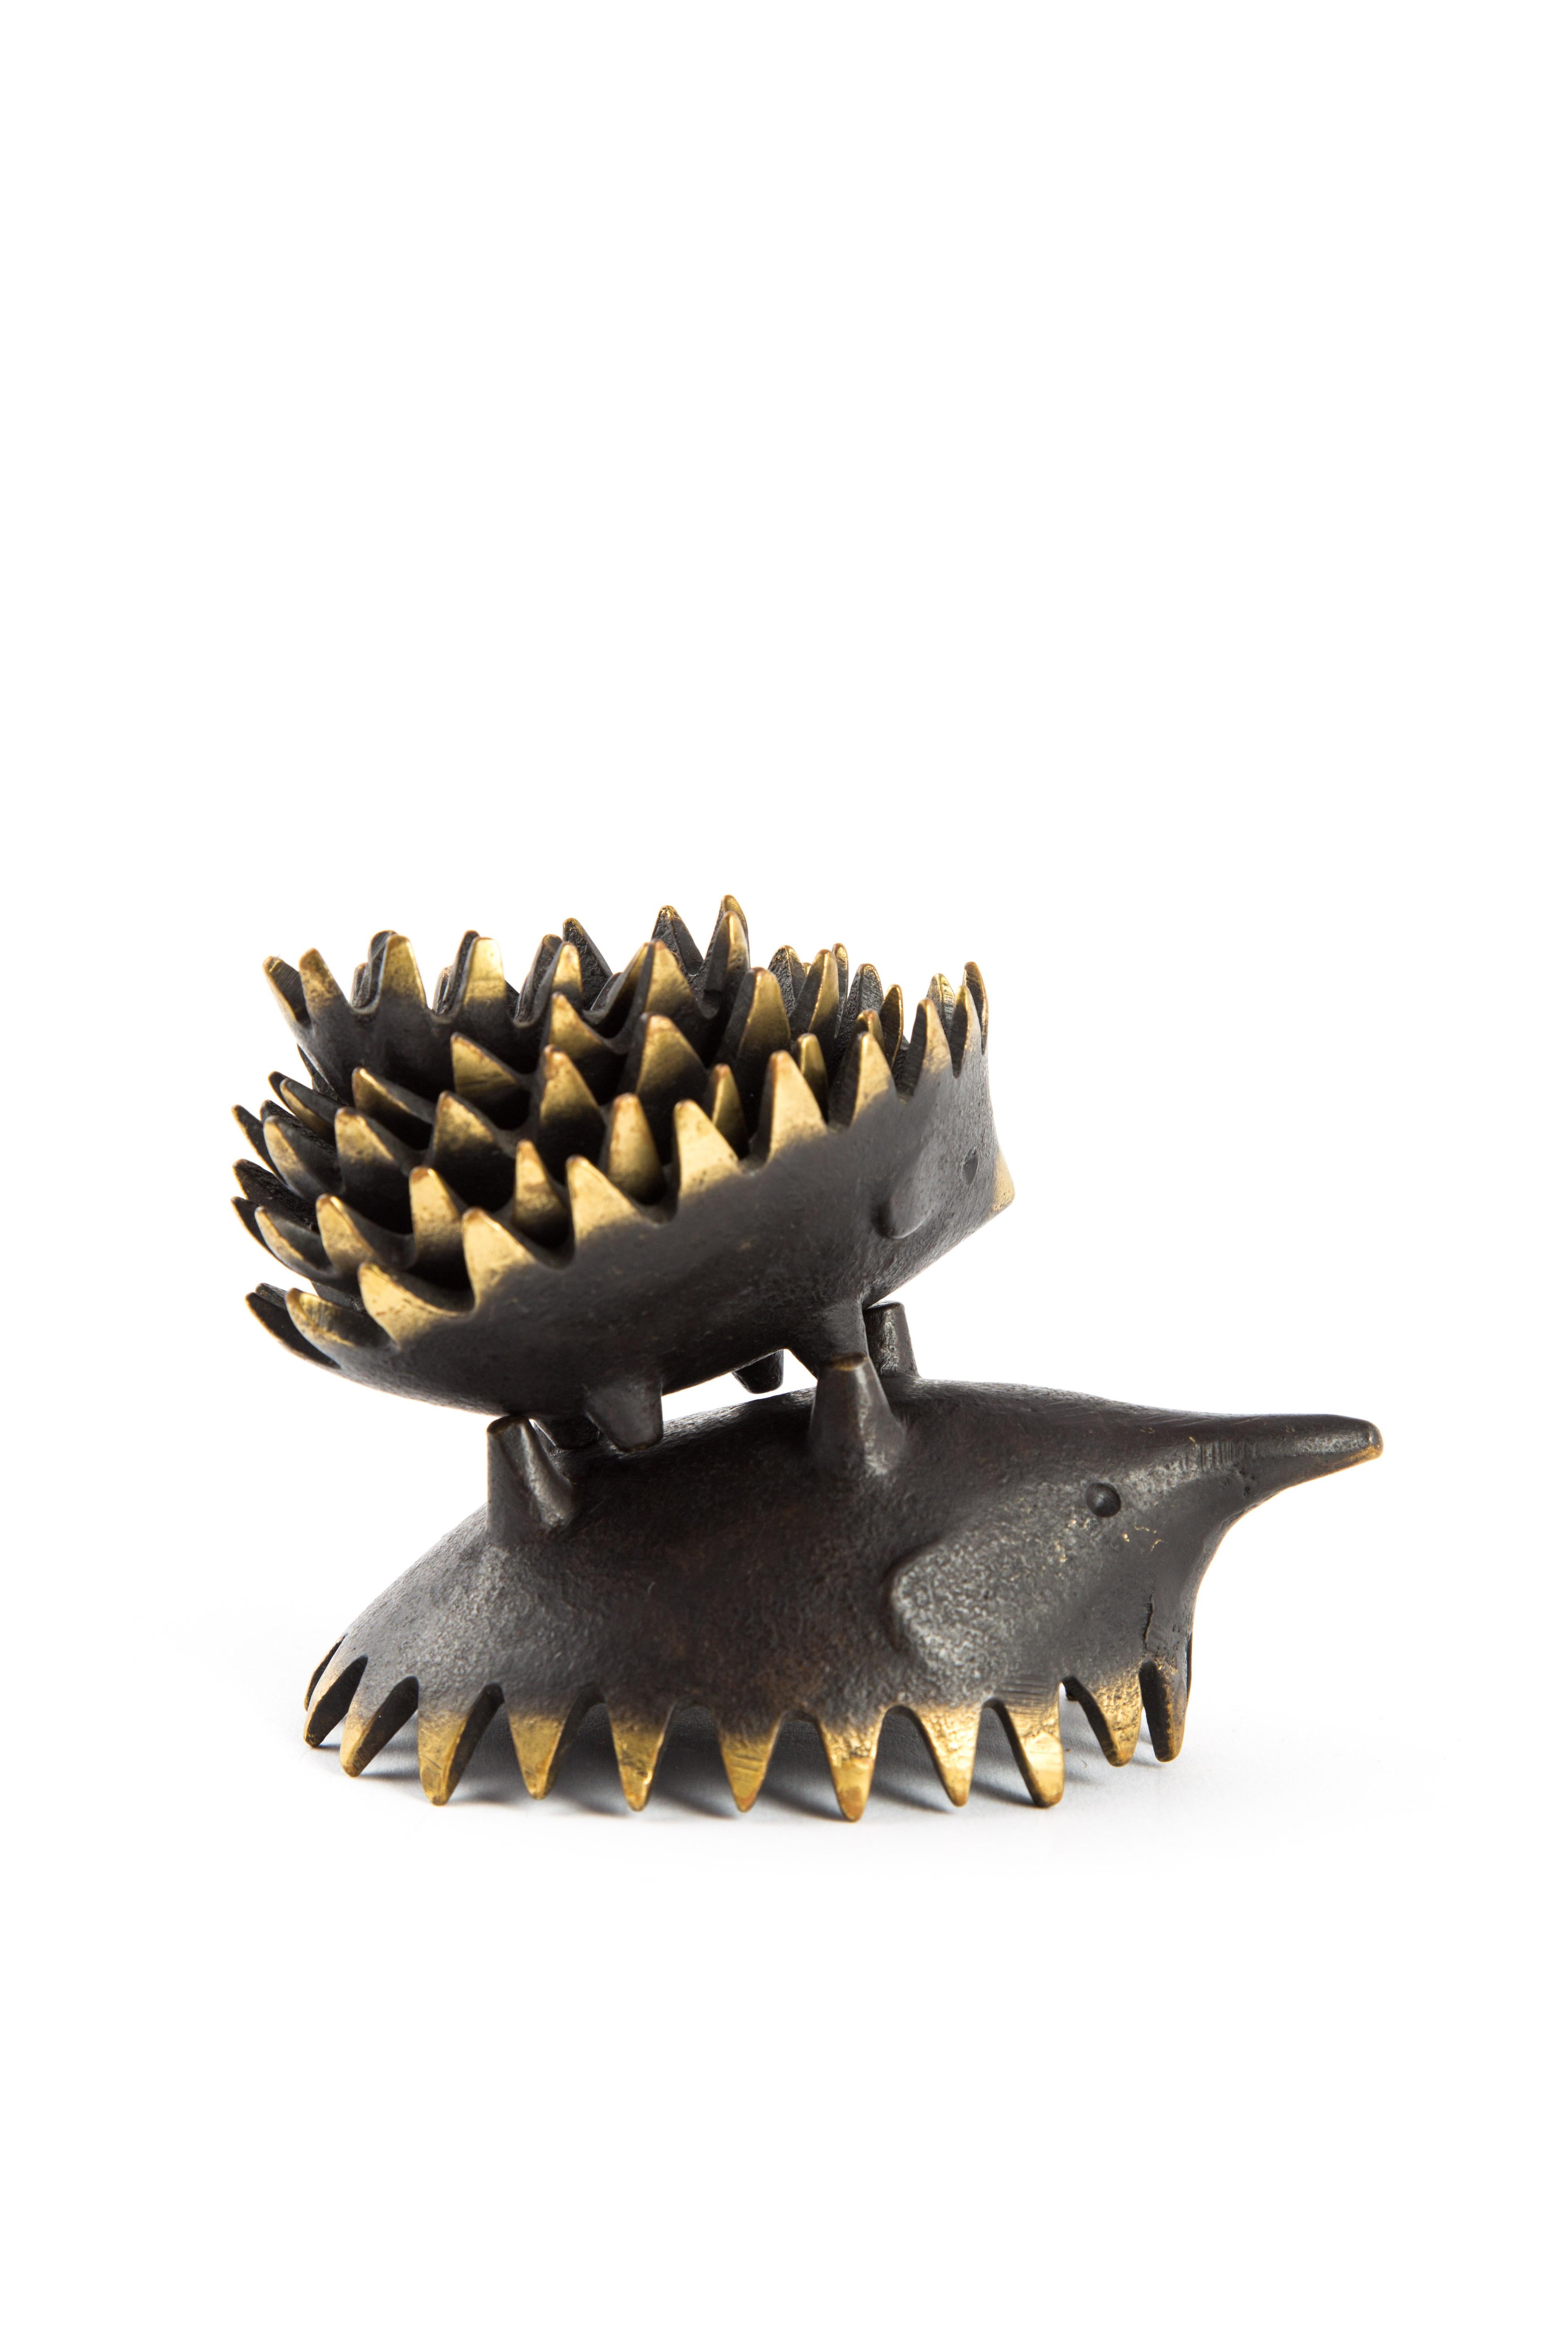 Hedgehog with her kids in bronze. The mother and kids have a very nice patina. Many years petted by hands. It is a heavy set and nice to play with. The little kid is very strong and thick. Originally made as a set of ashtrays! 

Handcrafted in